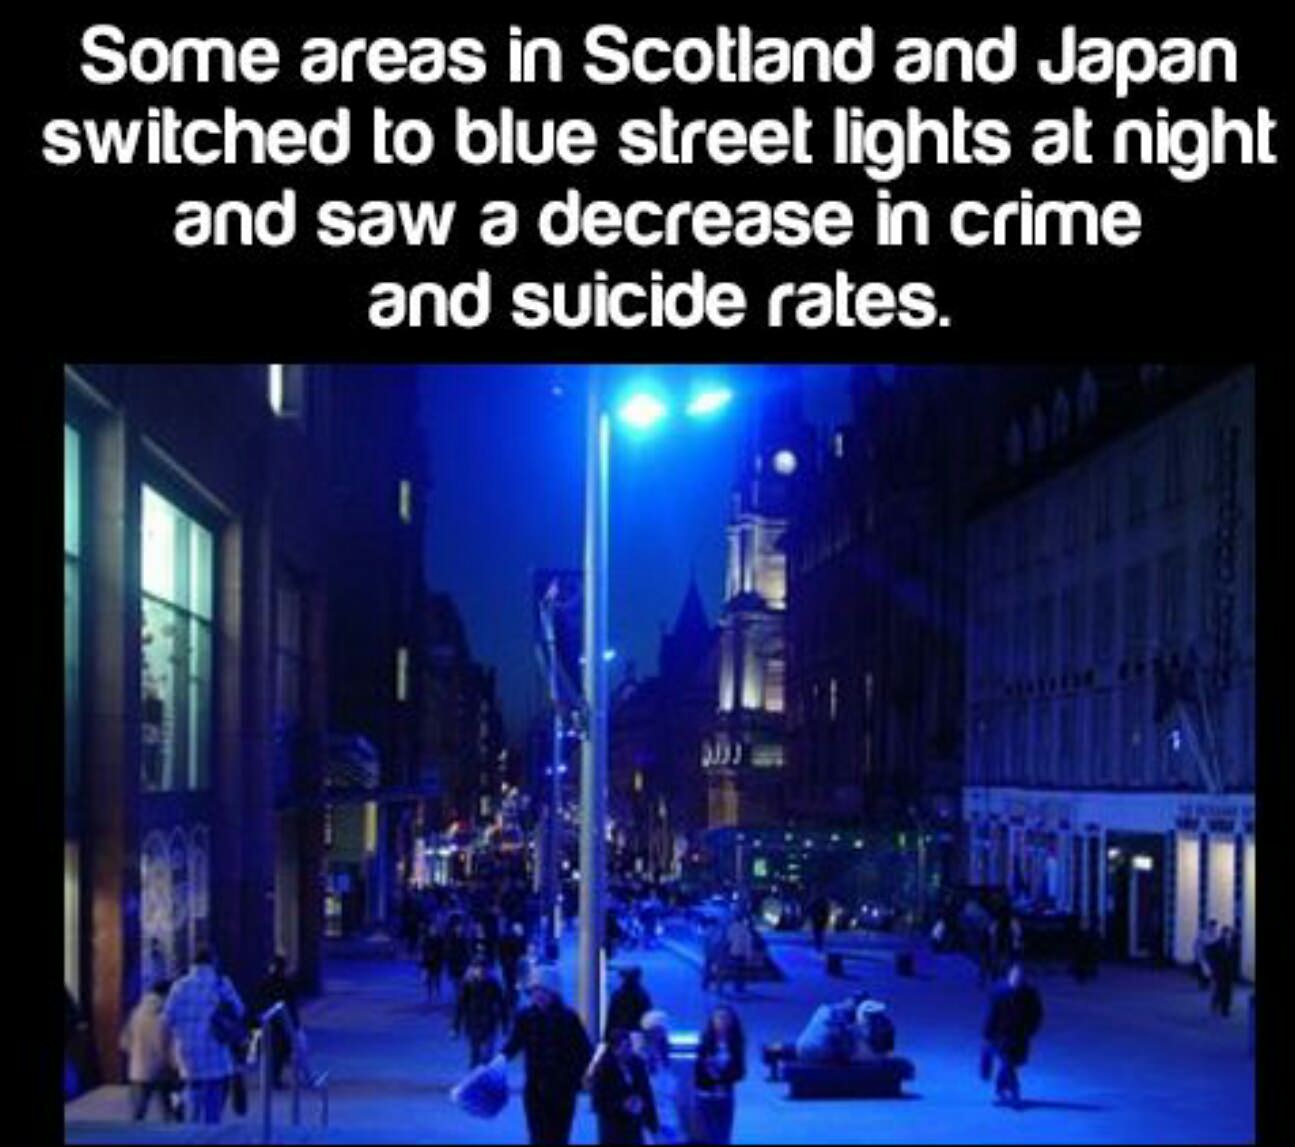 japan blue street lights - Some areas in Scotland and Japan switched to blue street lights at night and saw a decrease in crime and suicide rates. 2